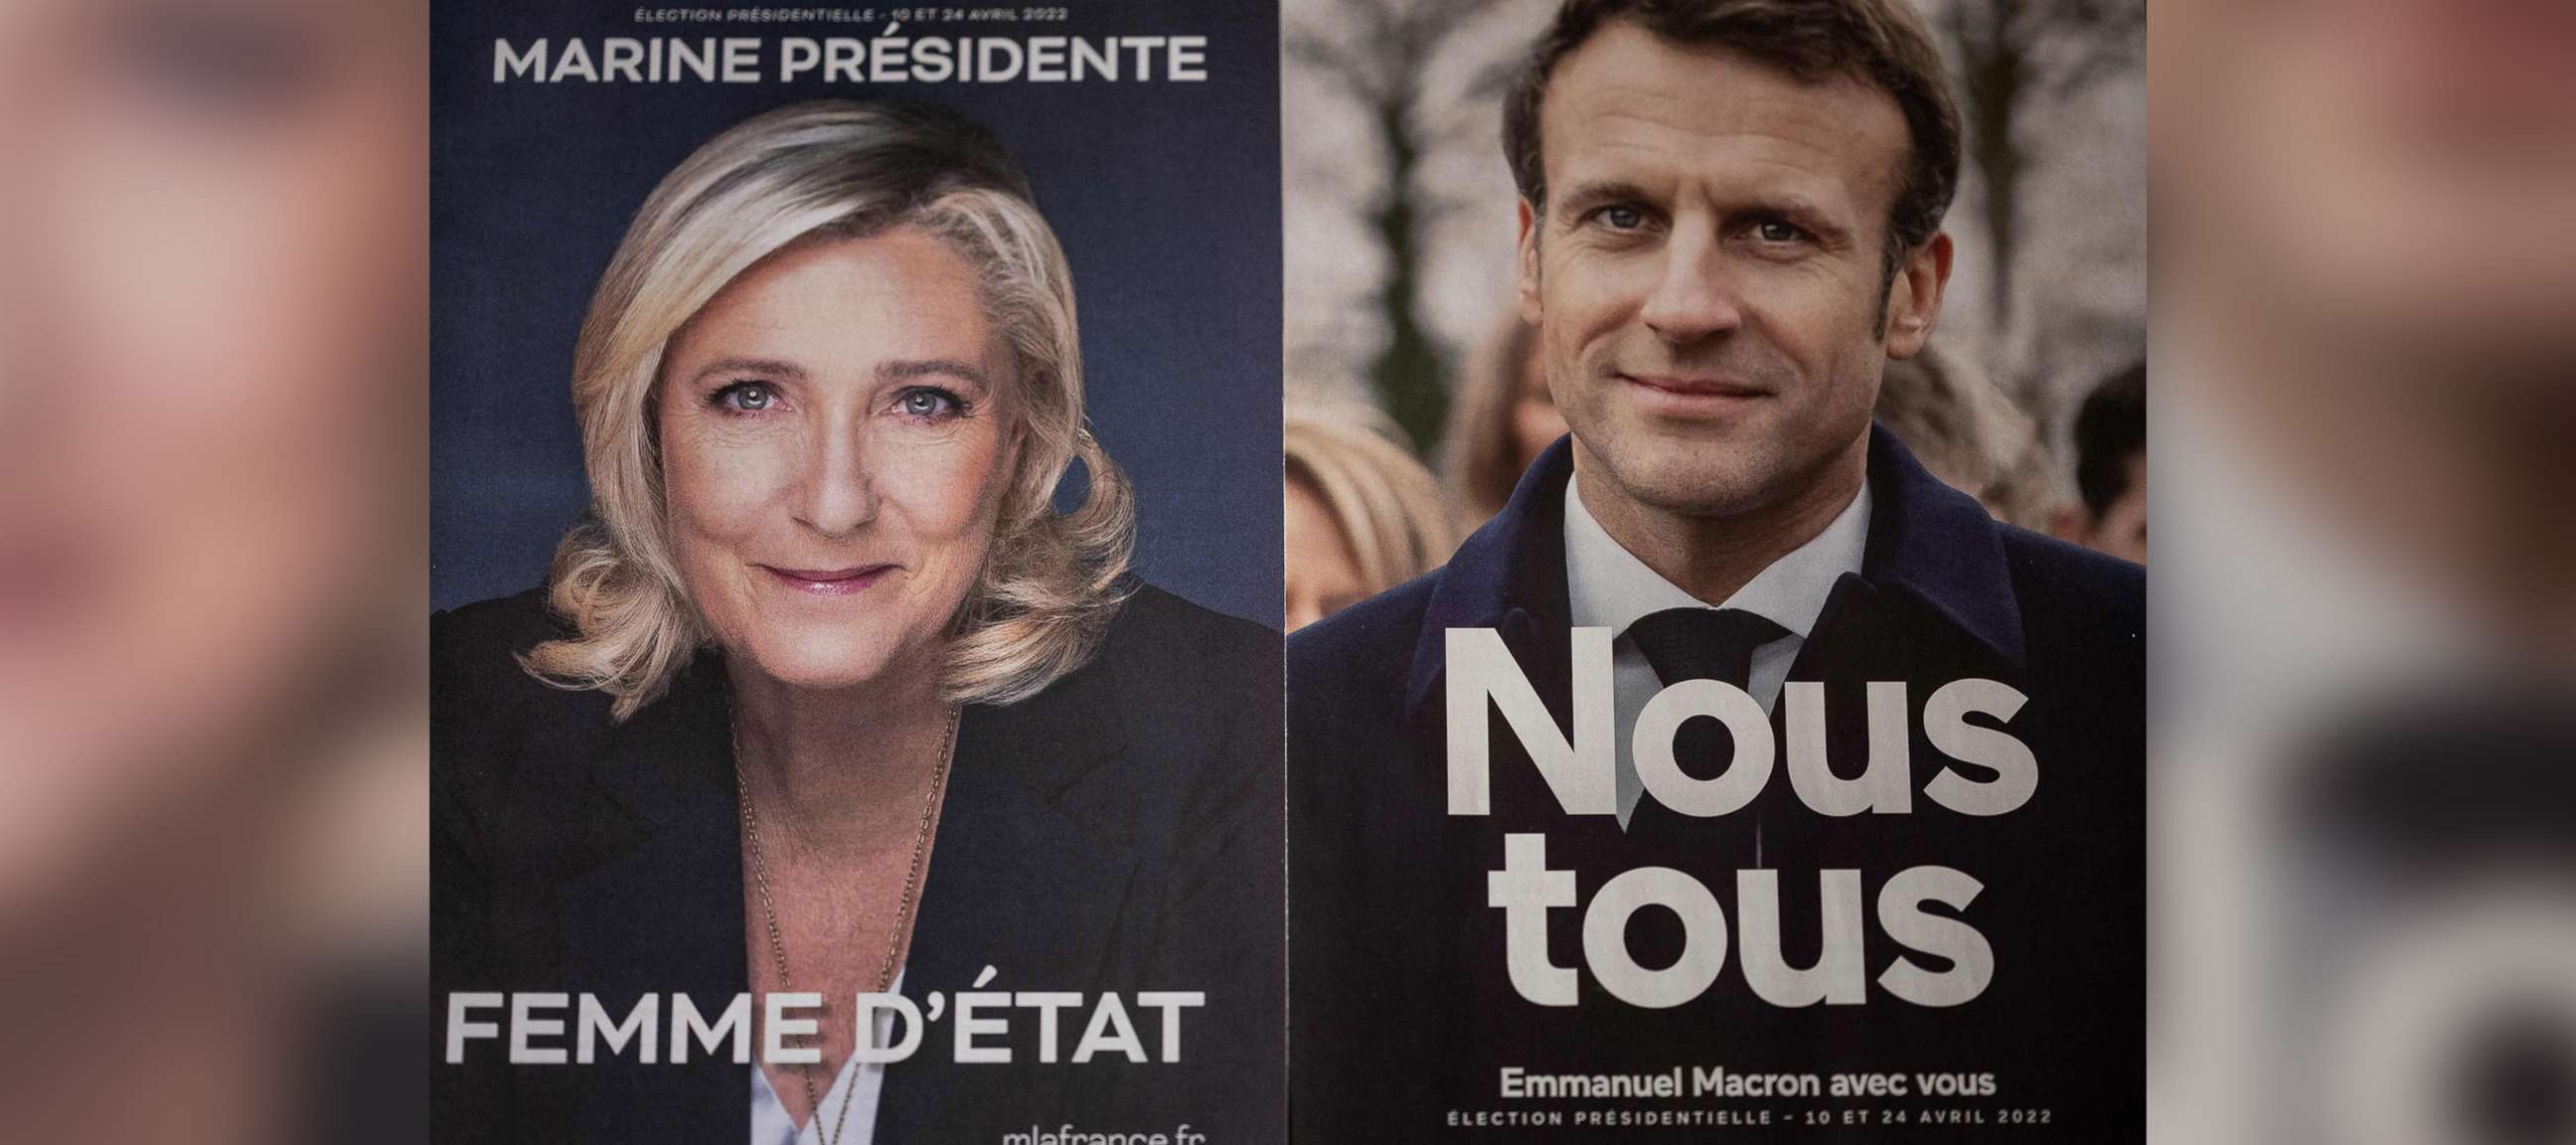 PHOTO: Campaign posters of candidate Marine Le Pen and Emmanuel Macron are displayed on April 20, 2022 in  Lavau sur Loire, France, ahead of the second round of the French presidential election.